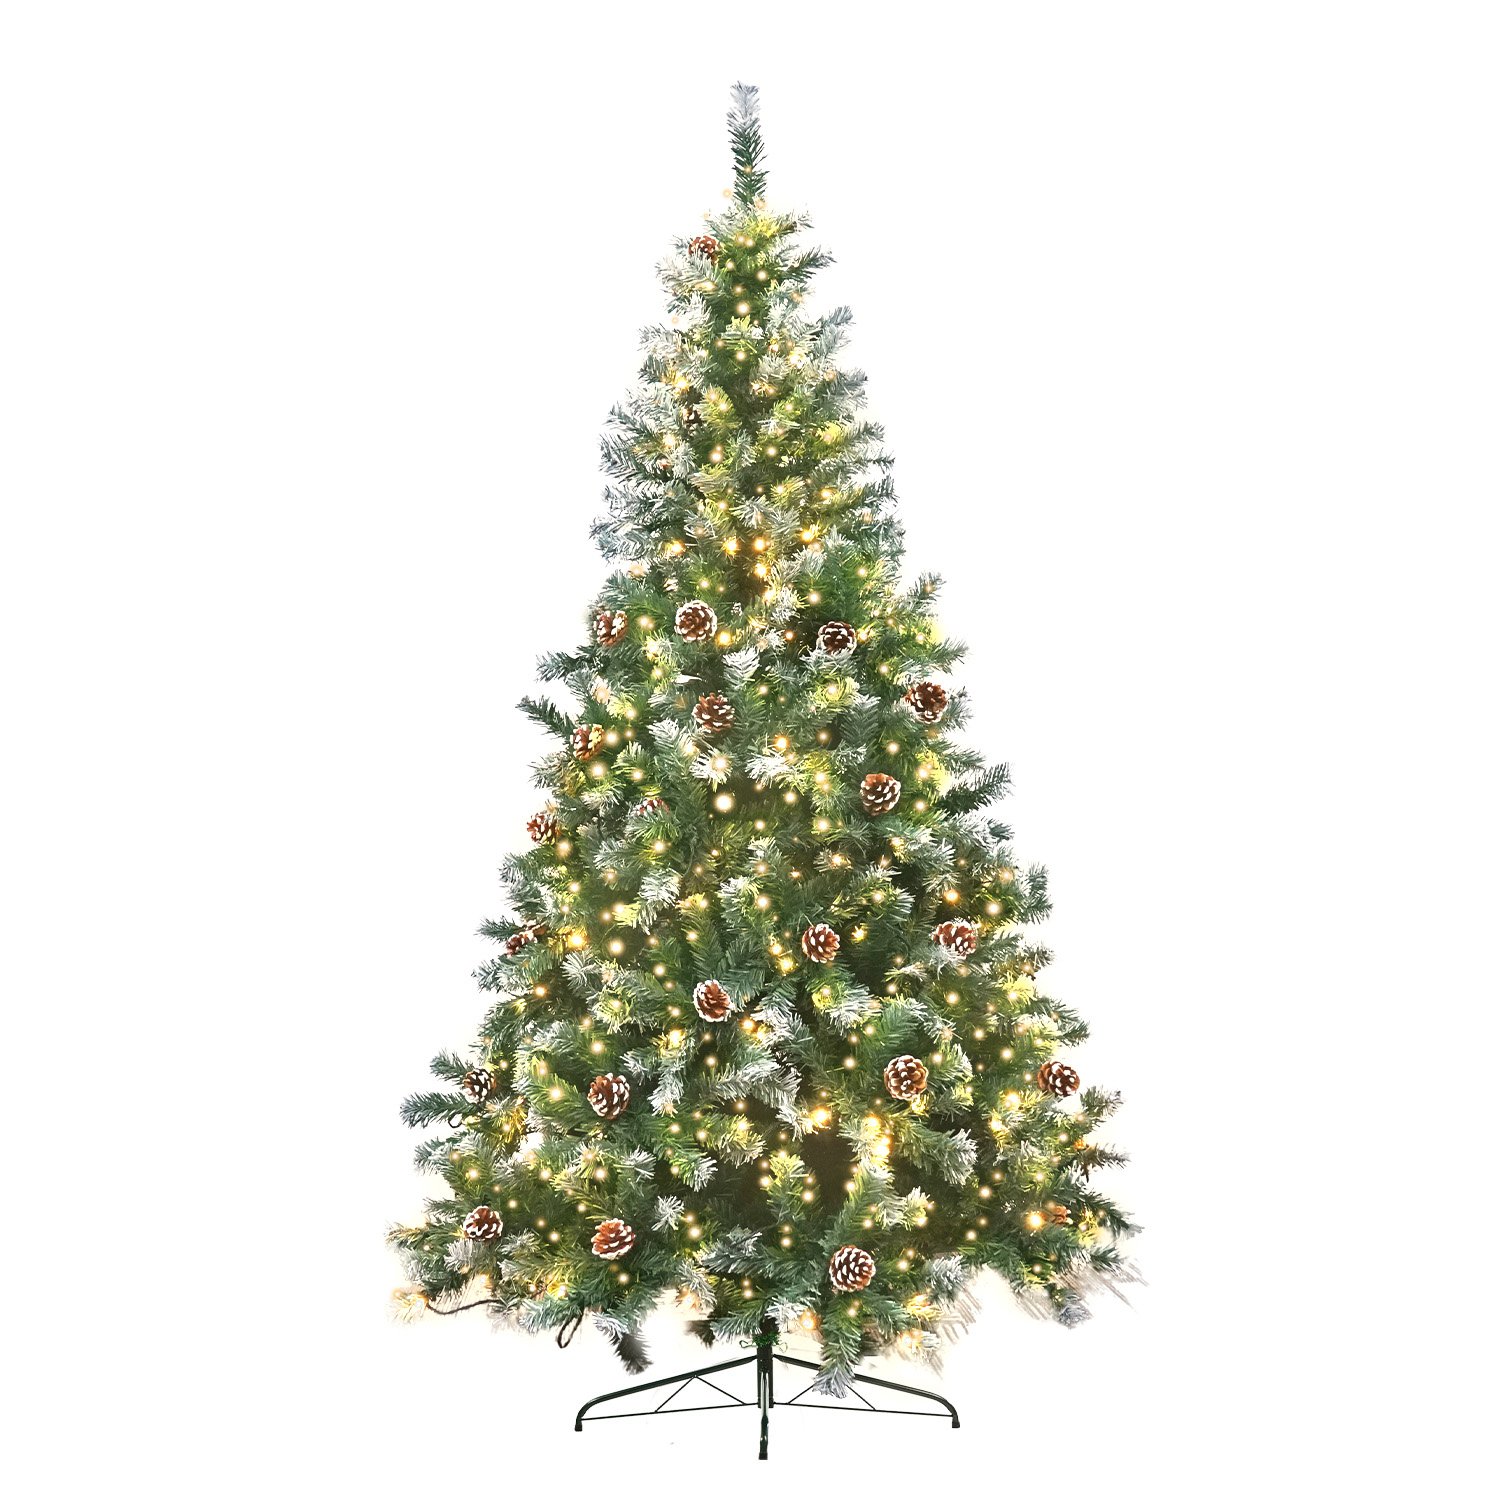 Christabelle 1.8m Pre Lit LED Christmas Tree with Pine Cones 1